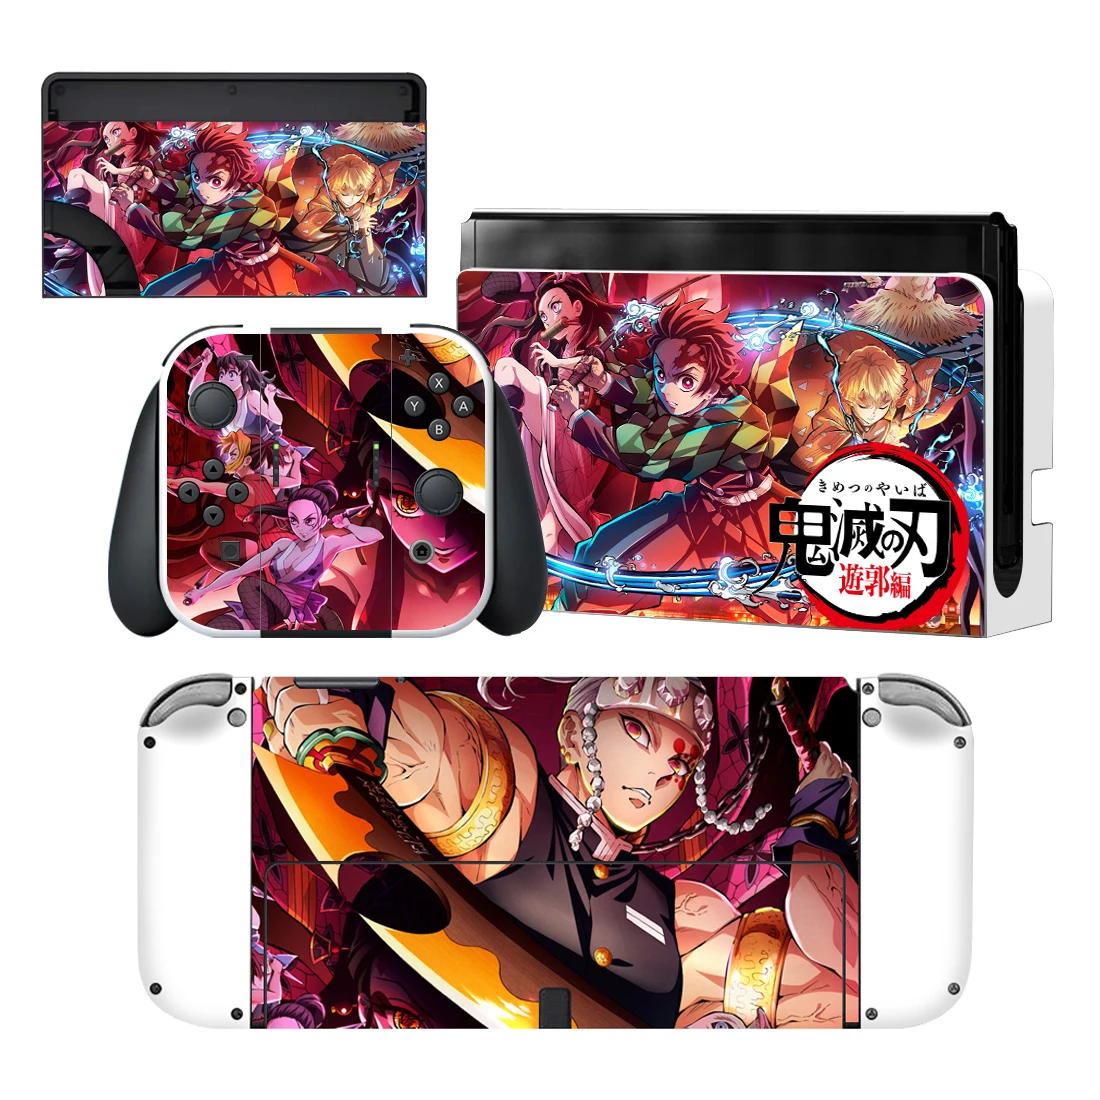 Demon Slayer NintendoNintendoswitch Skin Cover Sticker Decal for Nintendo Switch OLED Console Joy-con Controller Dock Skin Vinyl images - 6